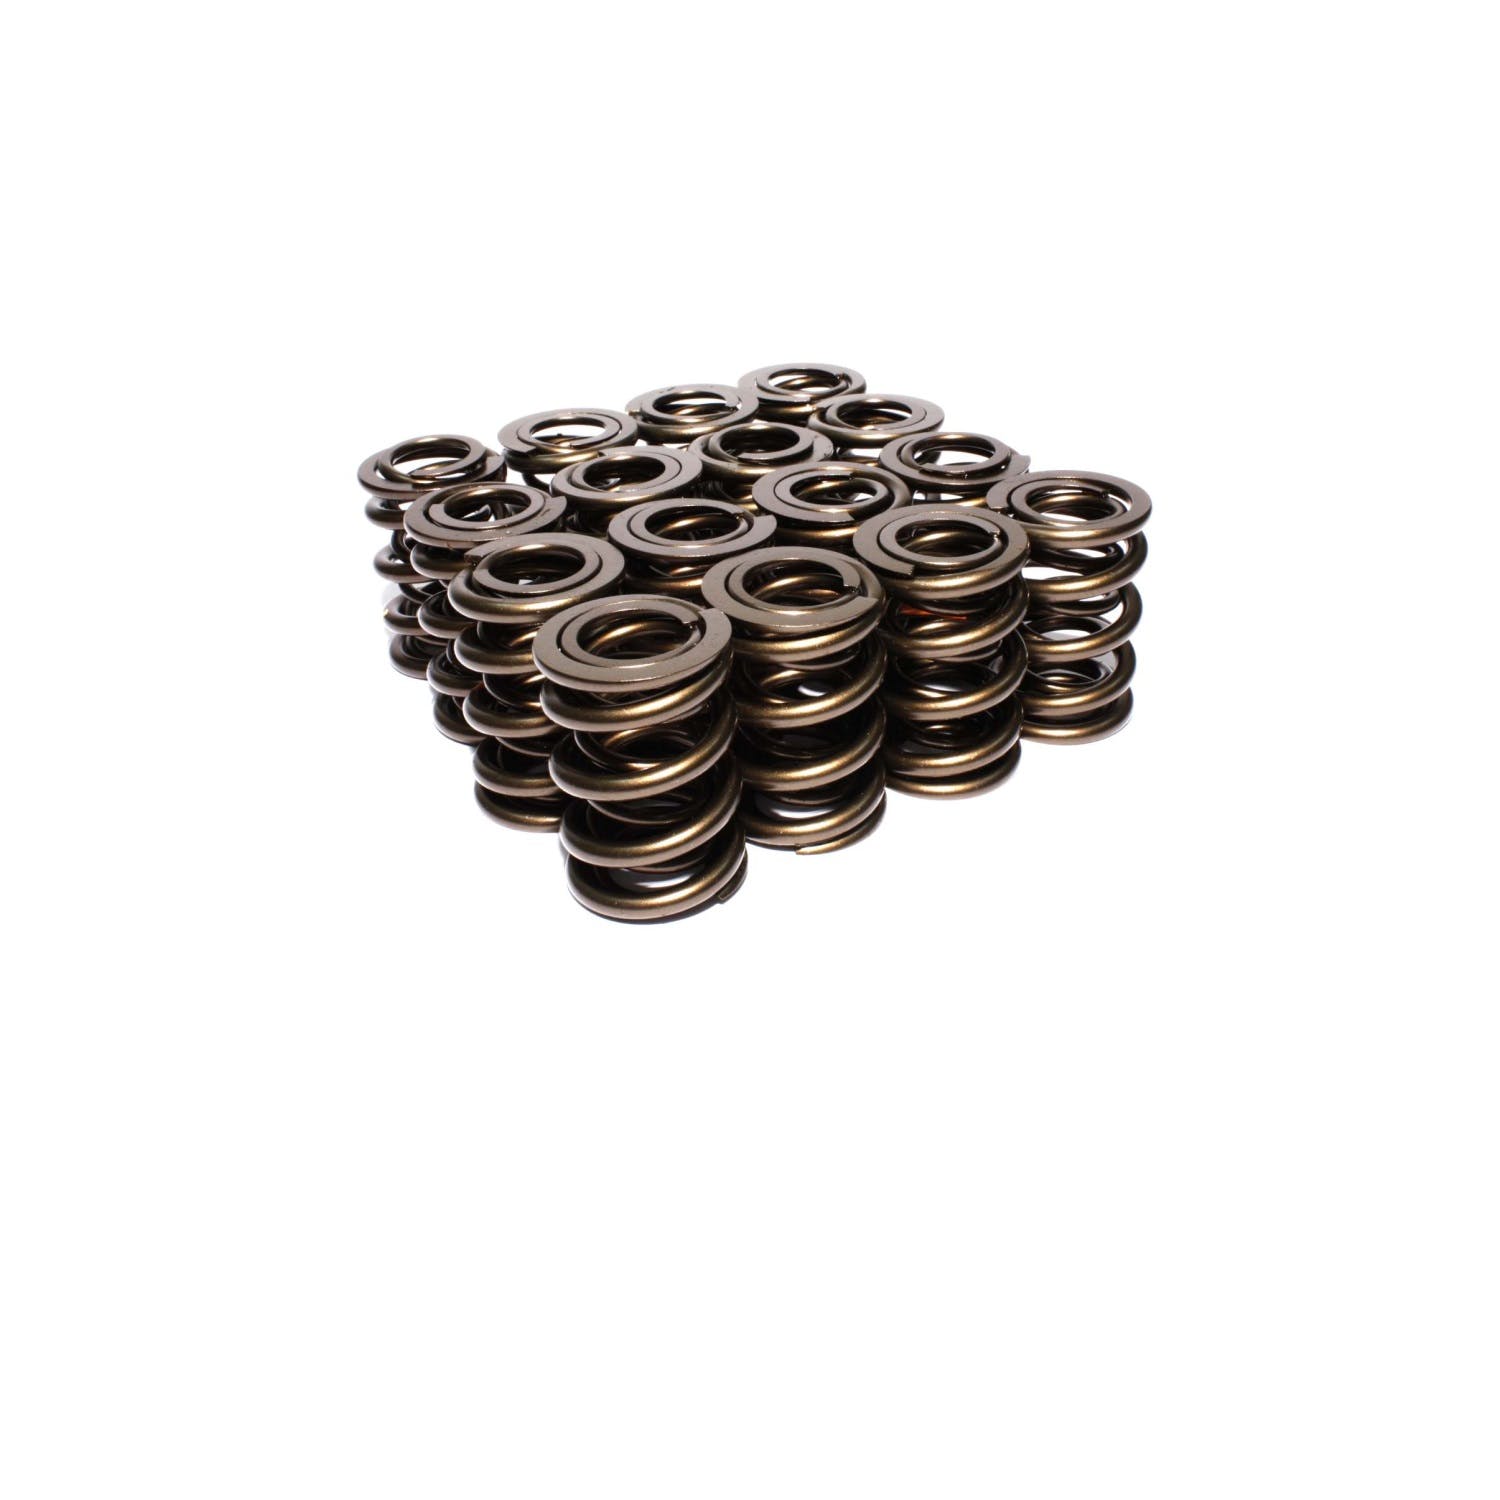 Competition Cams 959-16 Hi-Tech Oval Track Valve Spring